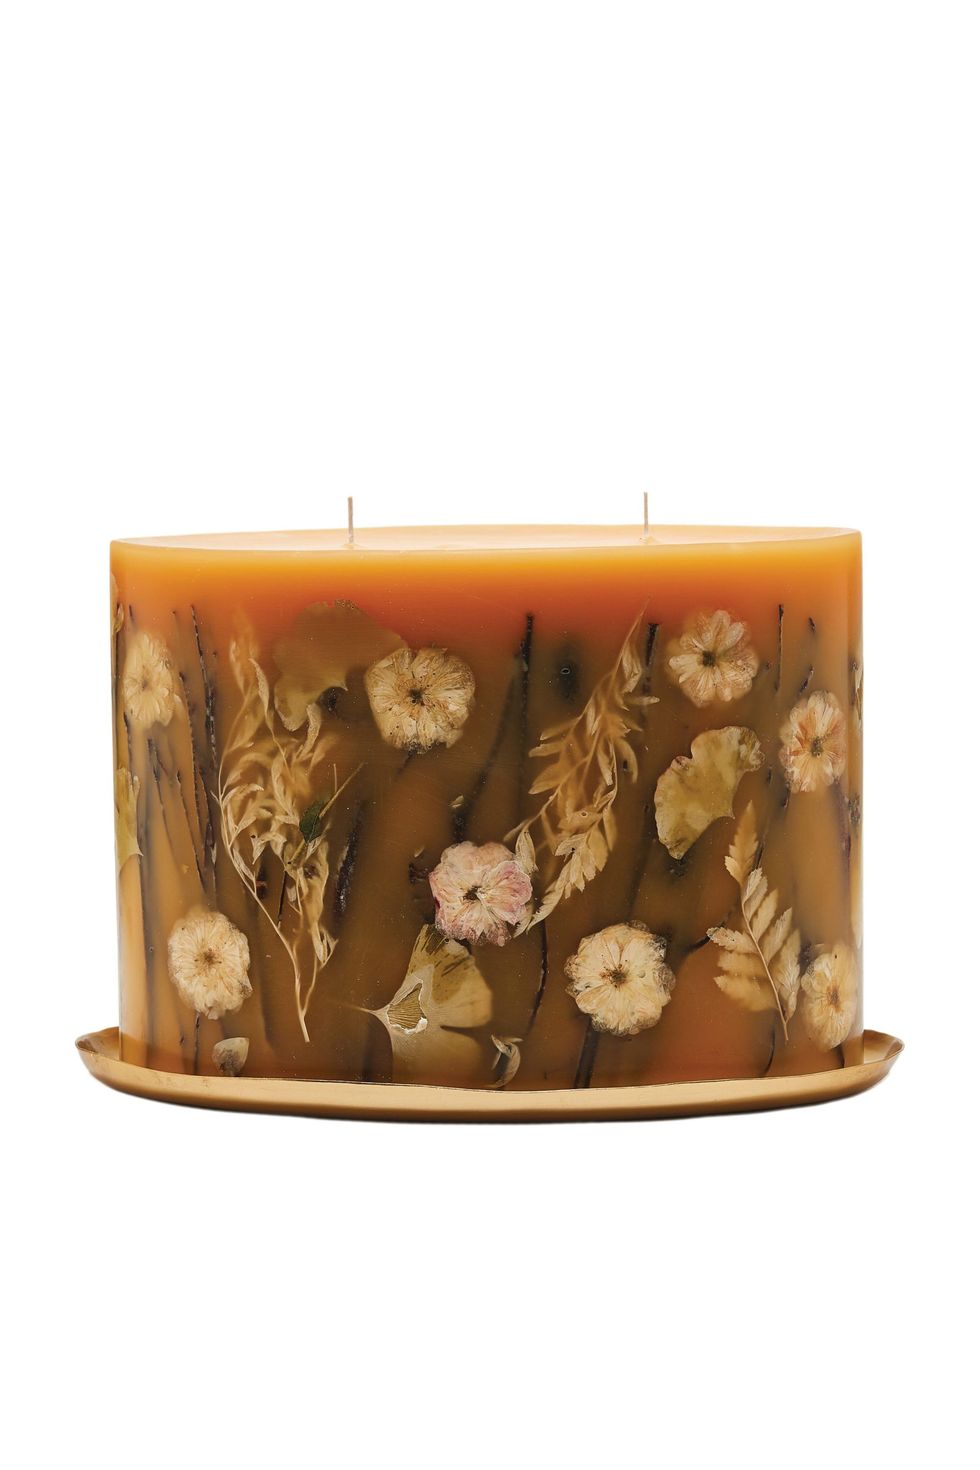 Honey Tobacco Candle